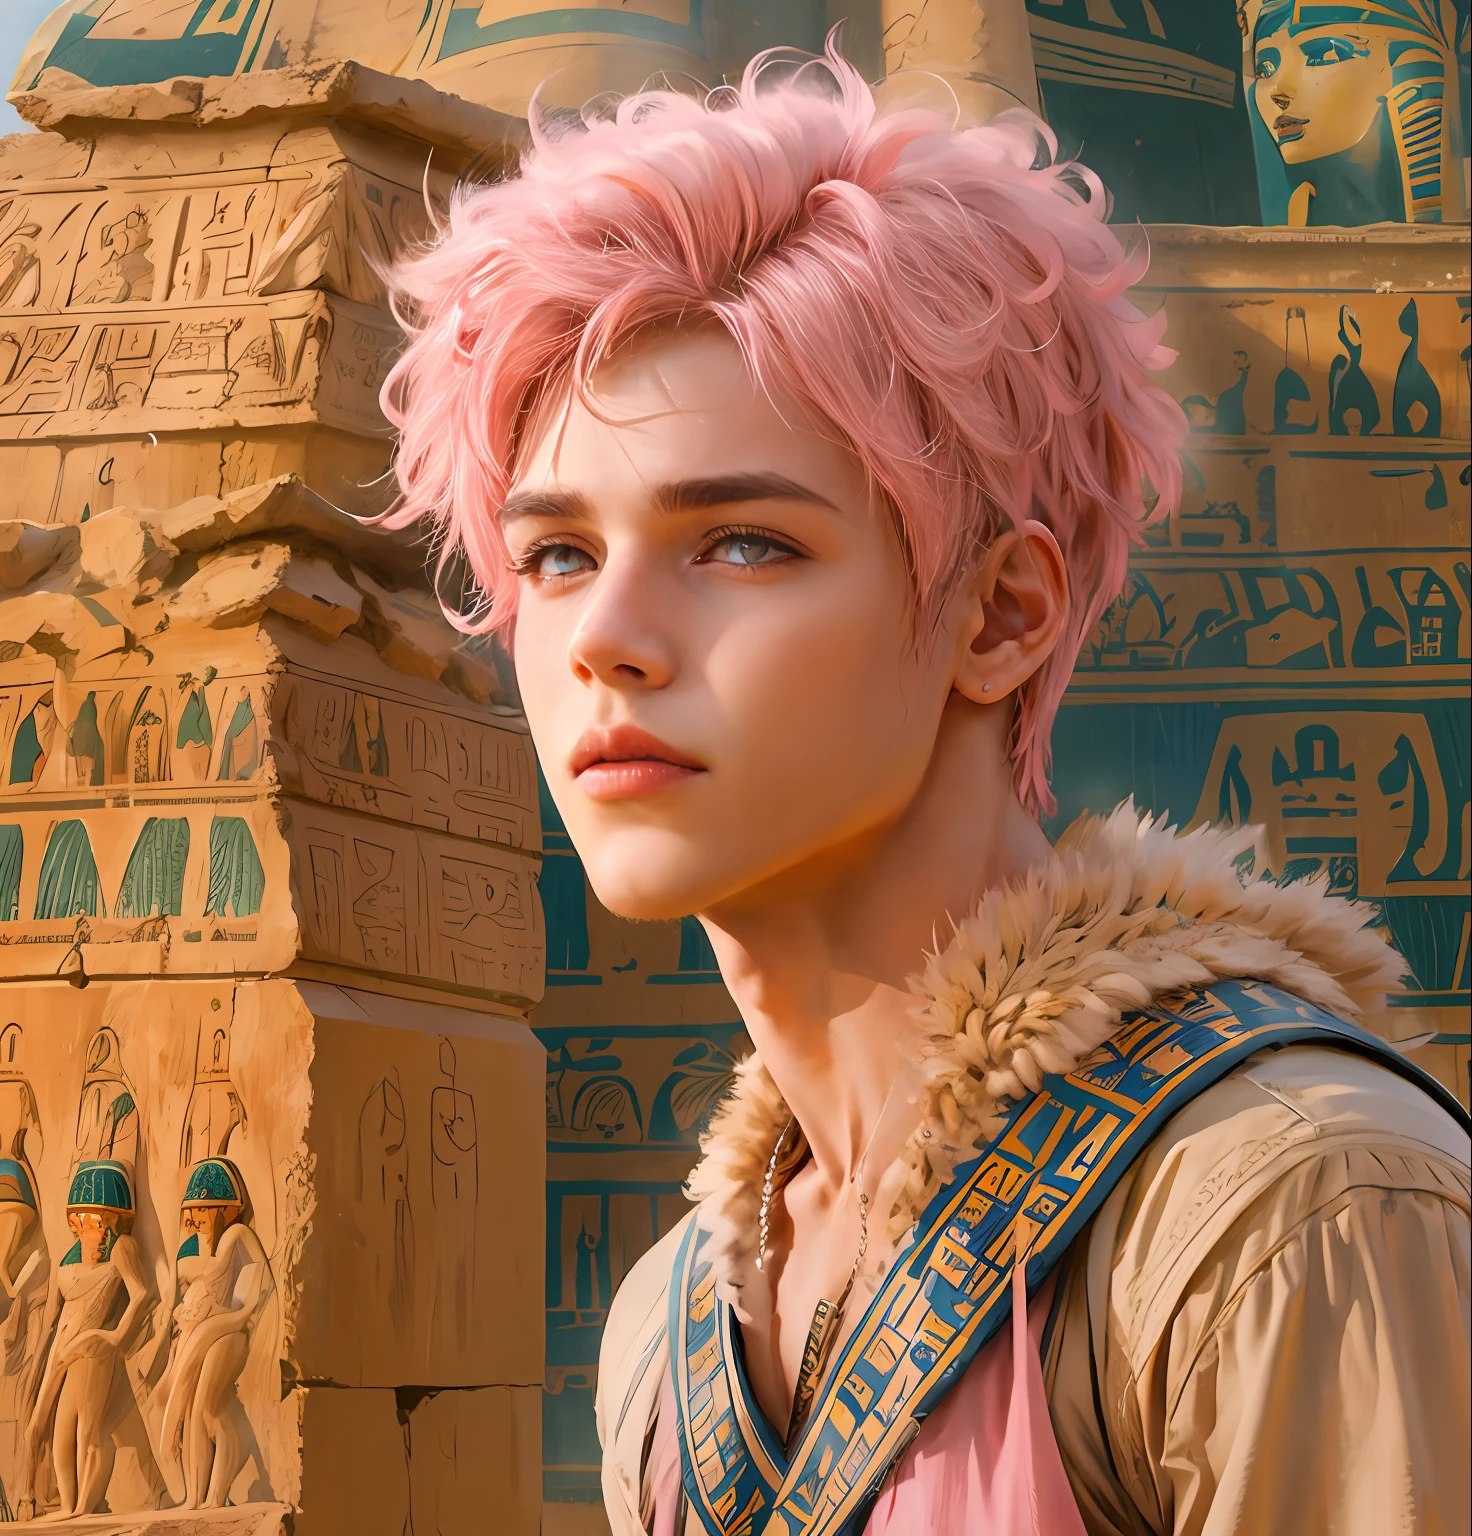 A 15-year-old boy with pink hair is a man who has honey-colored eyes in the background of ancient Egypt you can see the pyramids